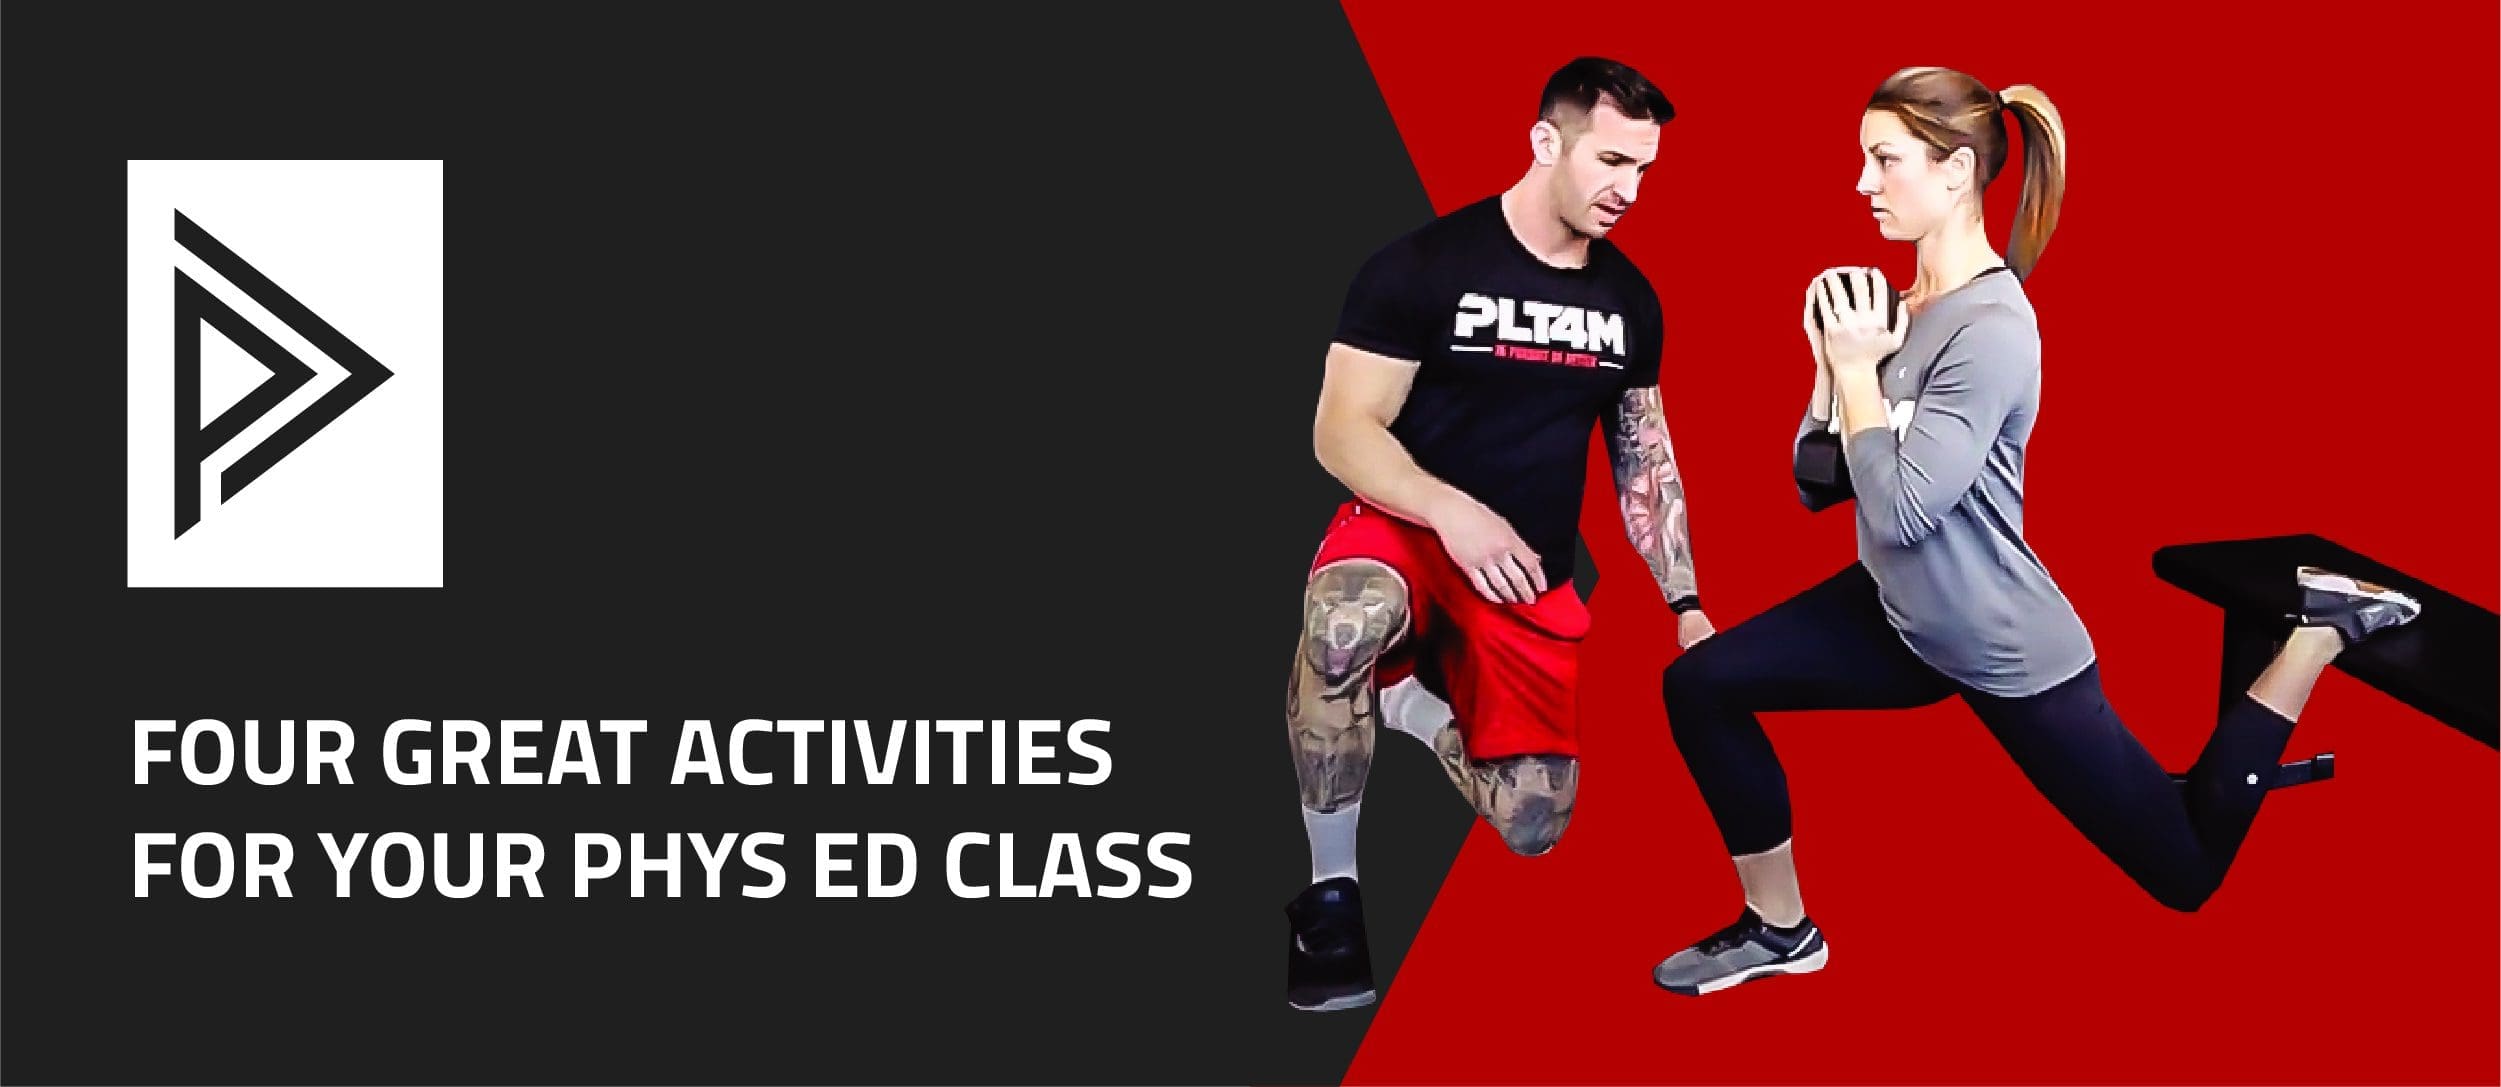 Four great activities for your phys ed class.